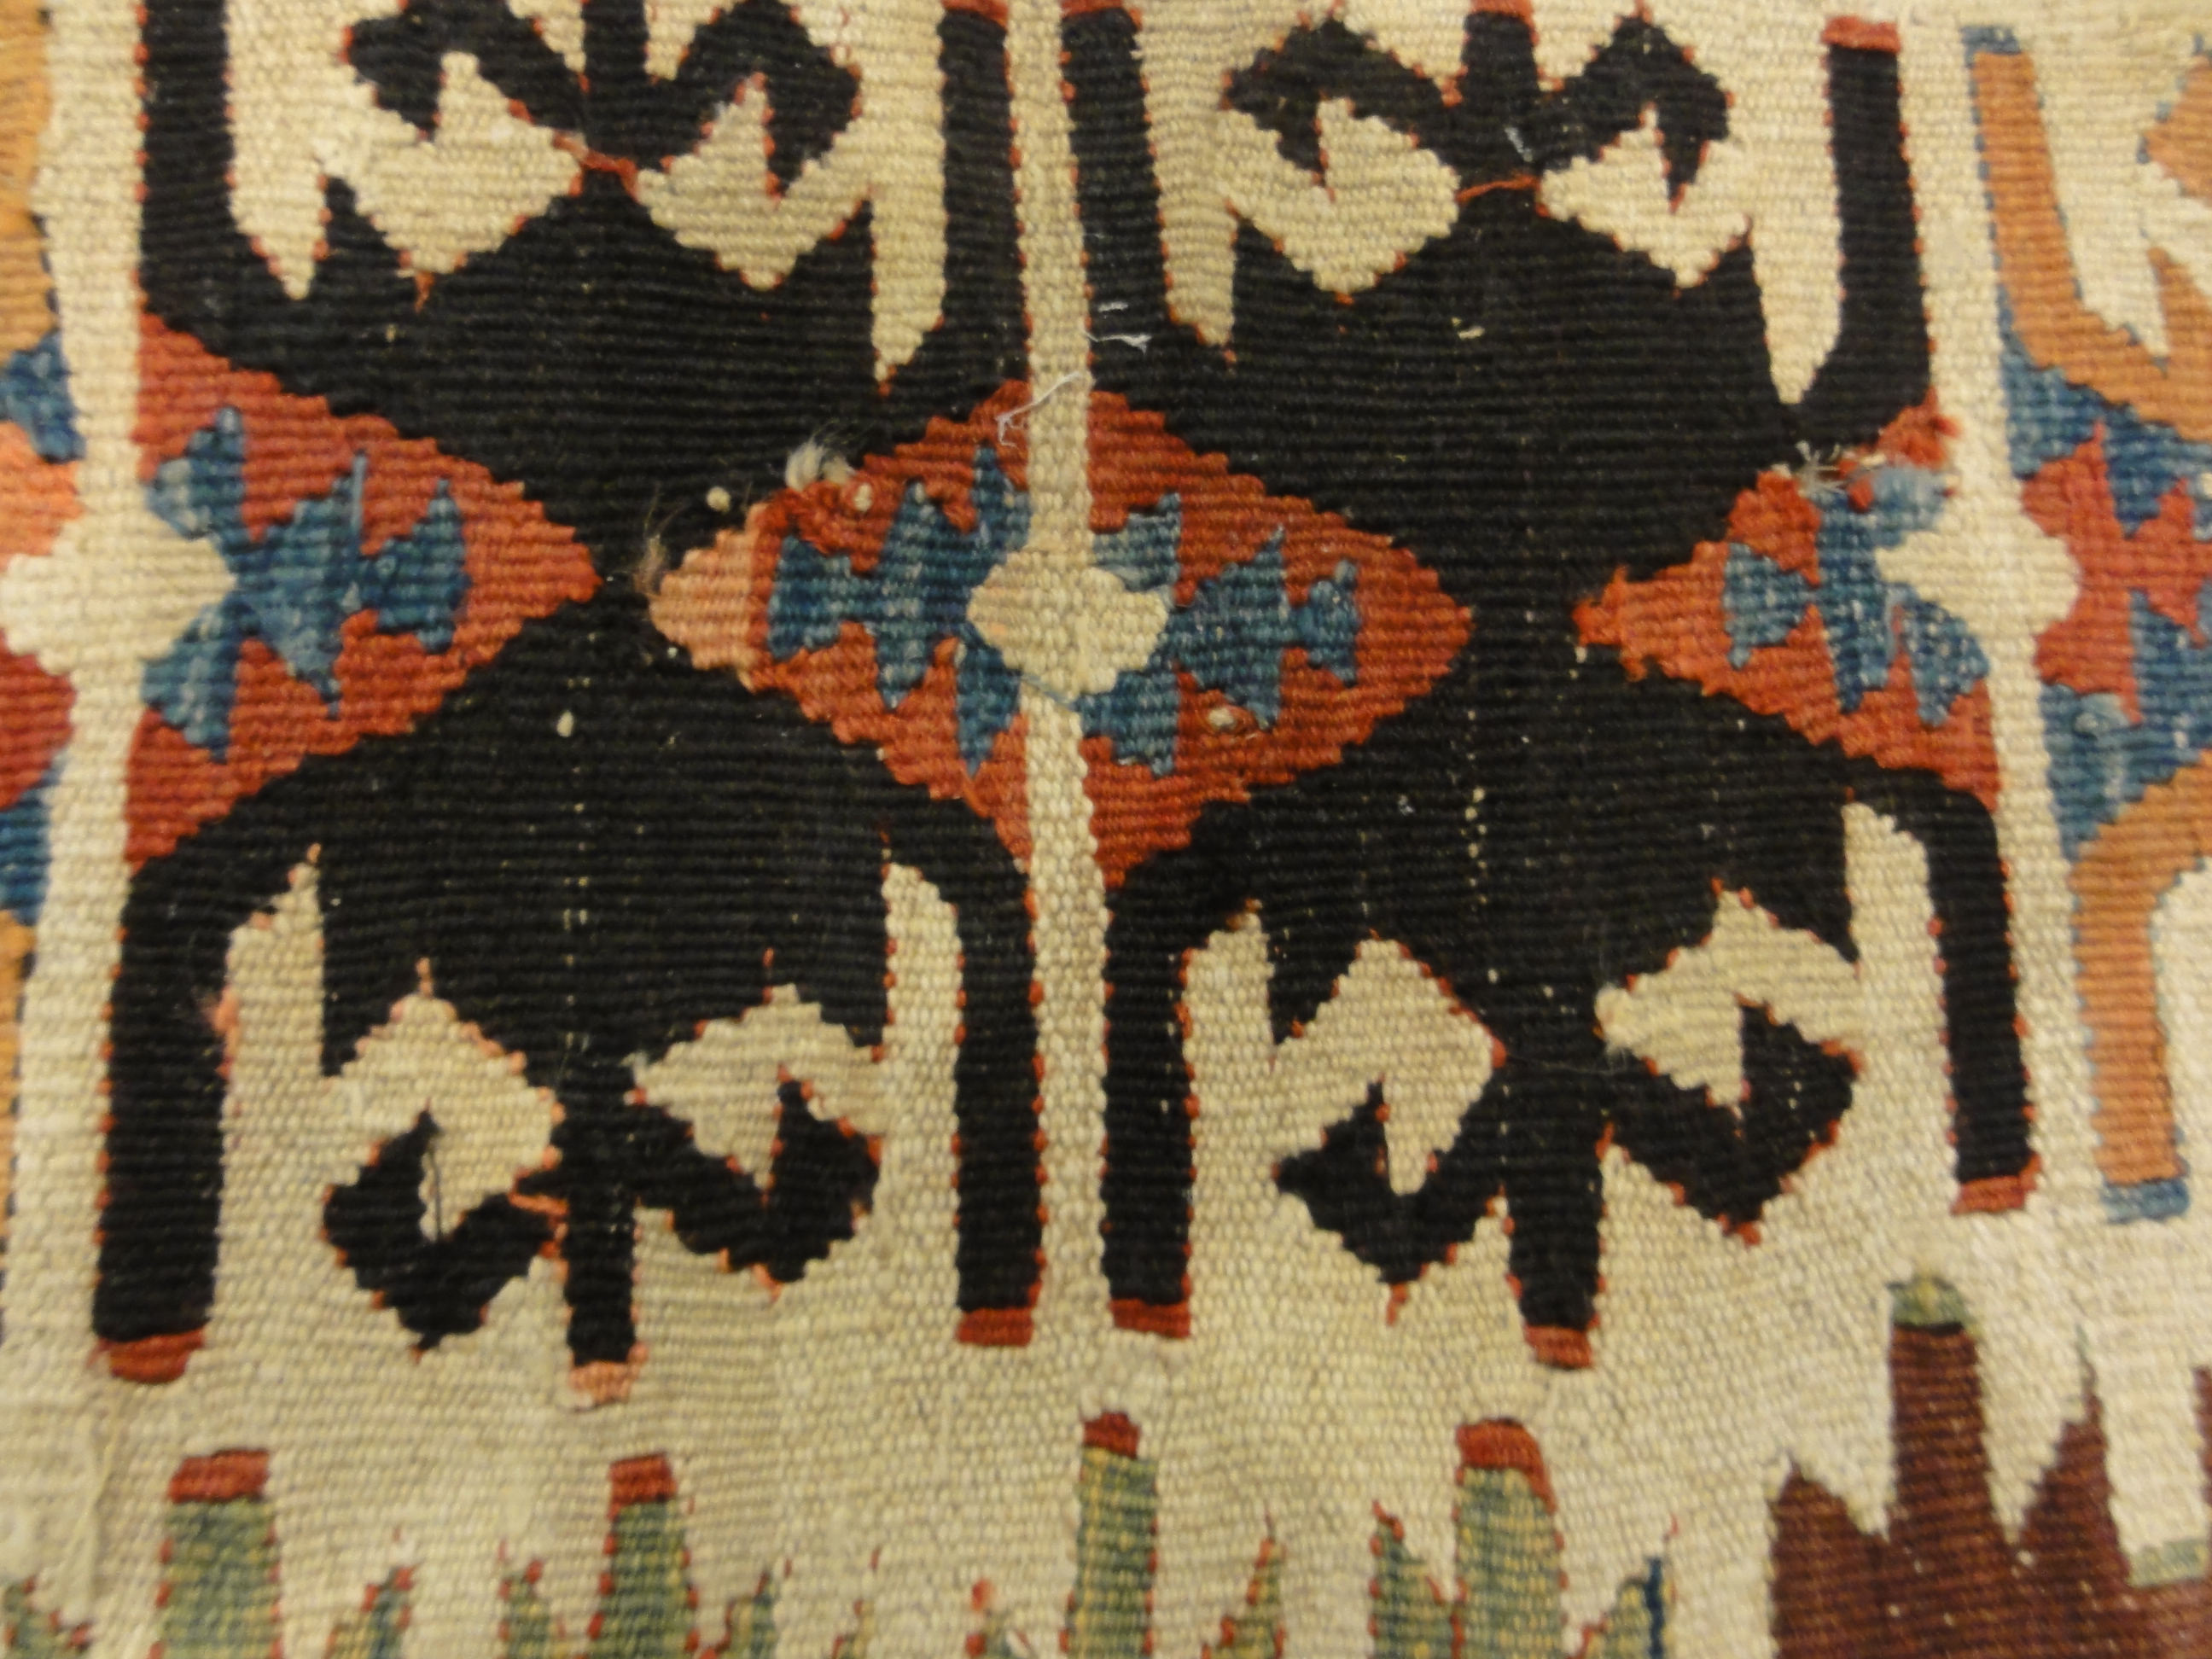 Fine Turkish Anatolia Rug from Late 18th Century. A piece of antique woven carpet art sold by Santa Barbara Design Center, Rugs and More in California.